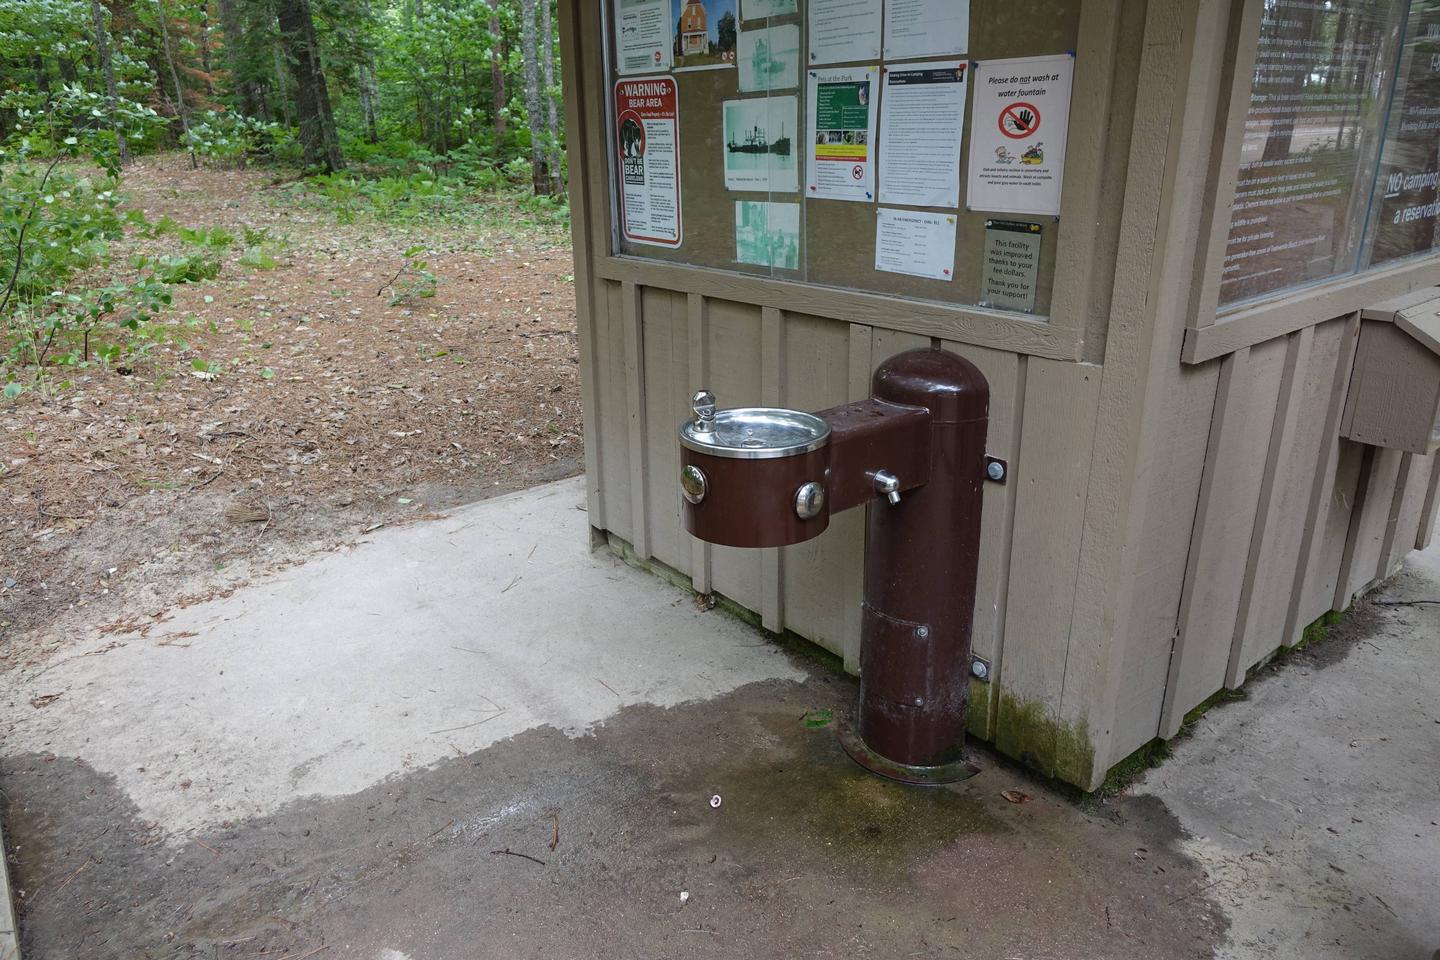 Water fountain and spigot station available at Twelvemile campgroundWater fountain/spigot